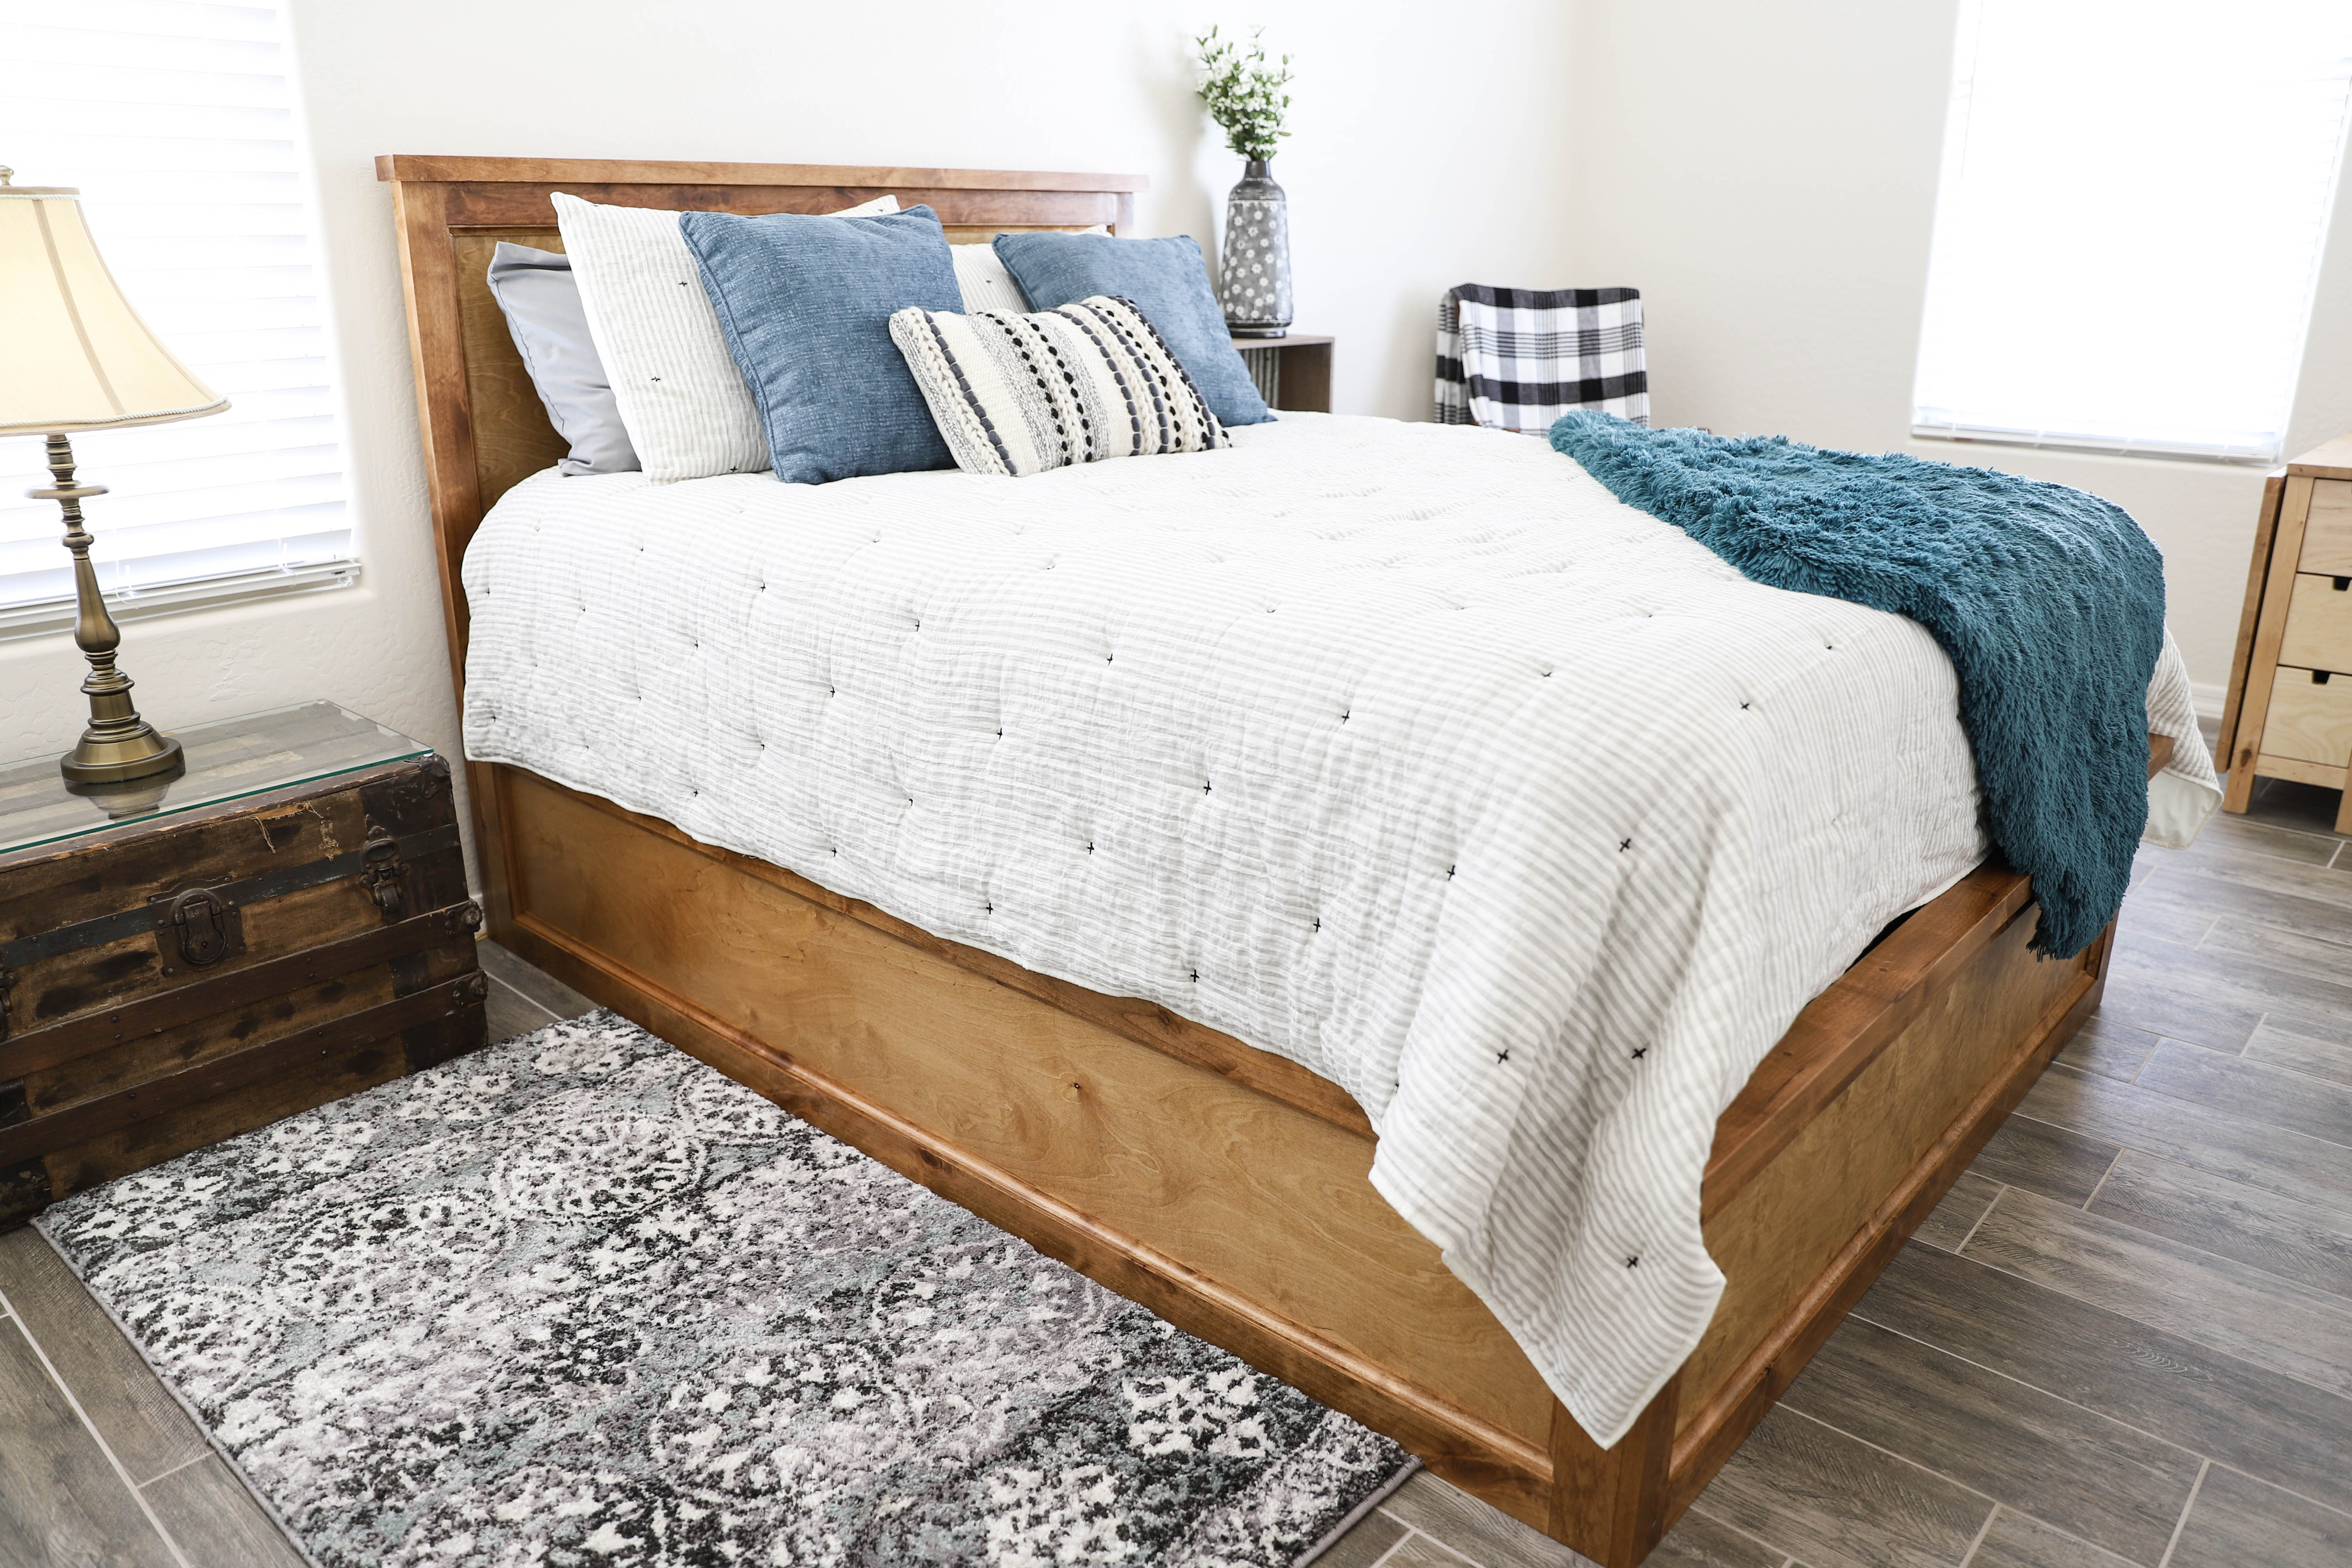 How To Build A Queen Size Storage Bed, Build Your Own Bed Frame With Storage